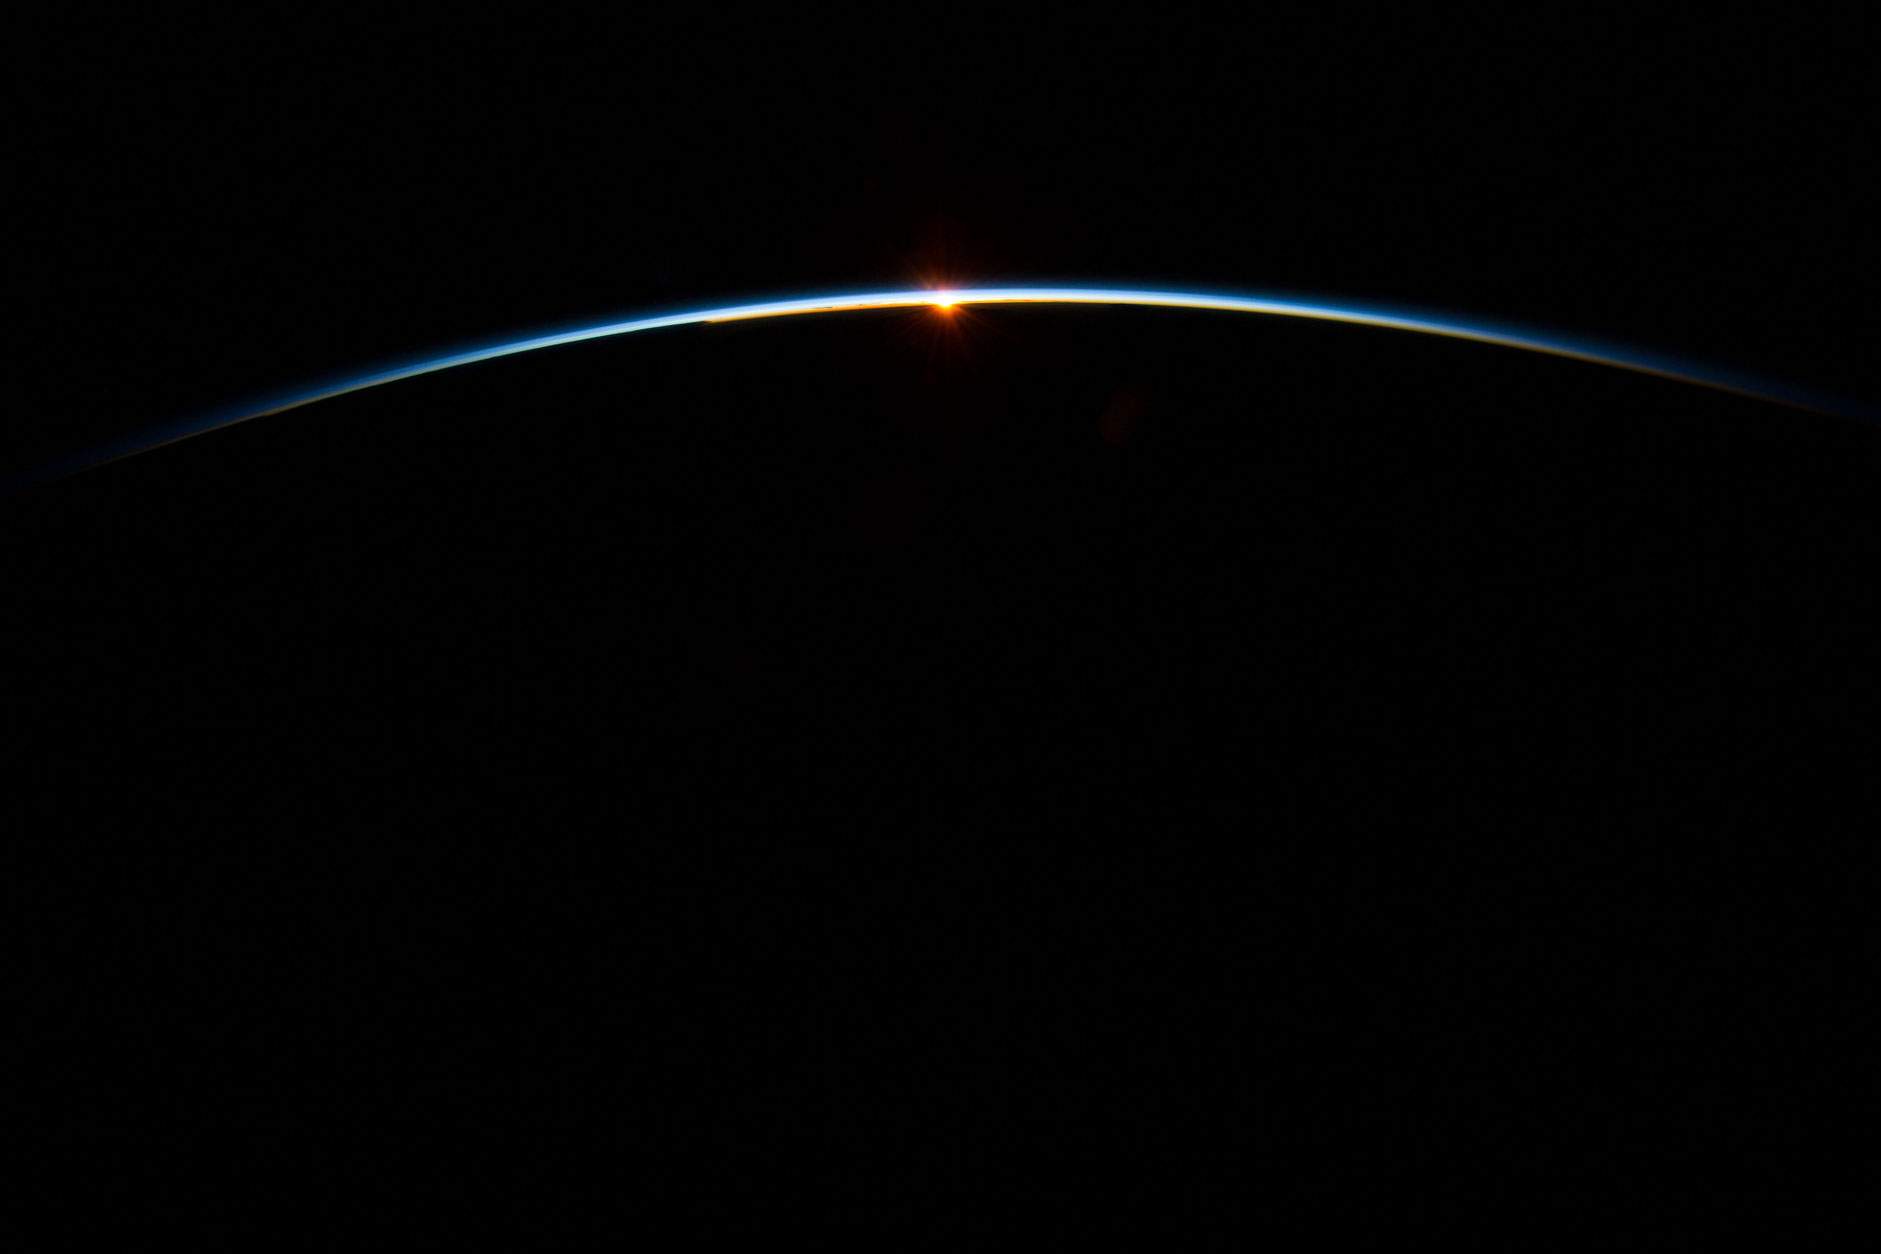 The sun, peeking through the thin line of Earth's atmosphere, photographed from the International Space Station.